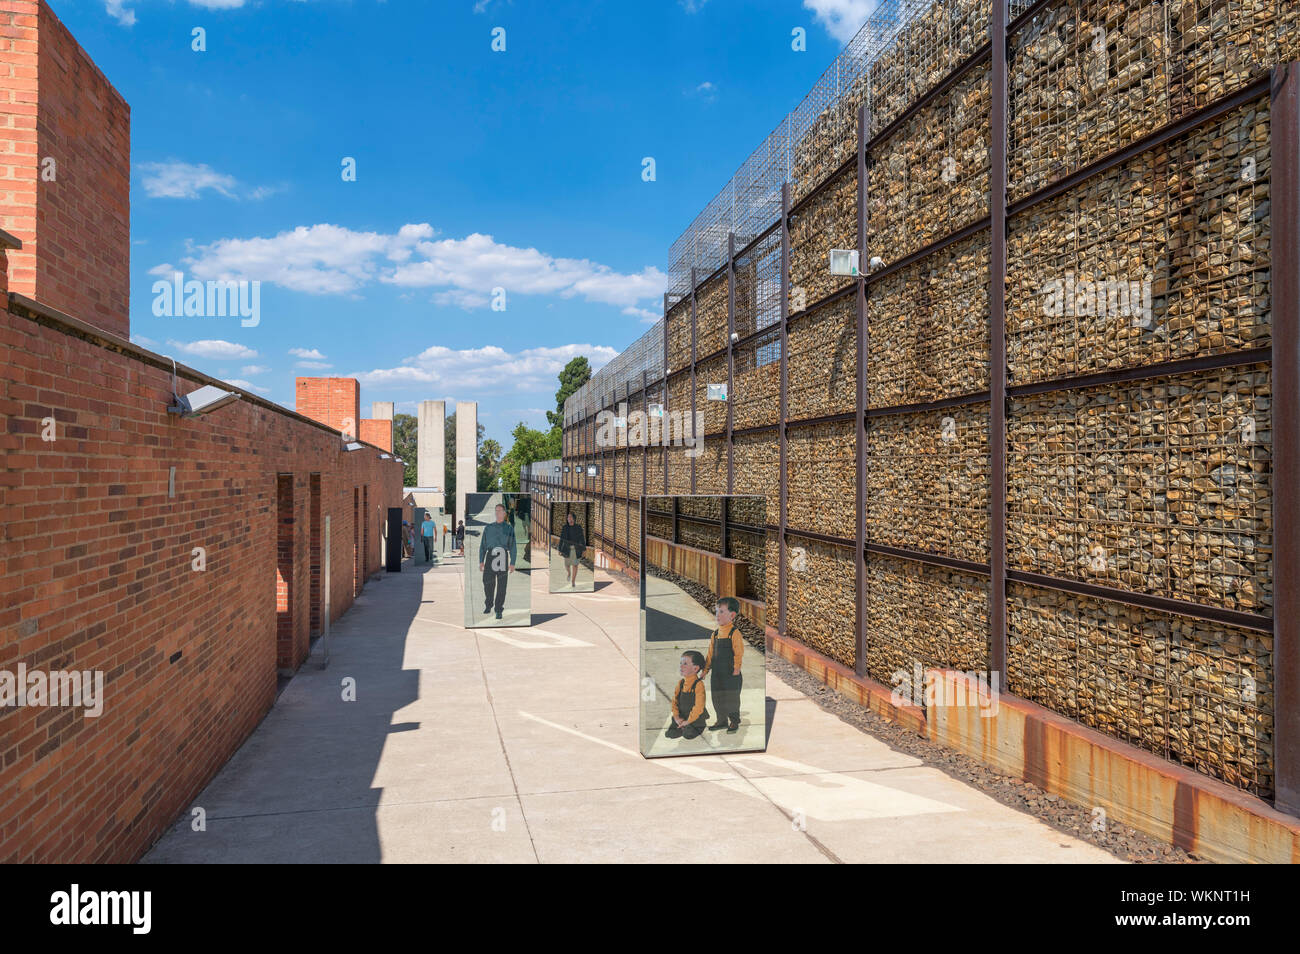 The Apartheid Museum, Gold Reef City, Johannesburg, South Africa Stock Photo